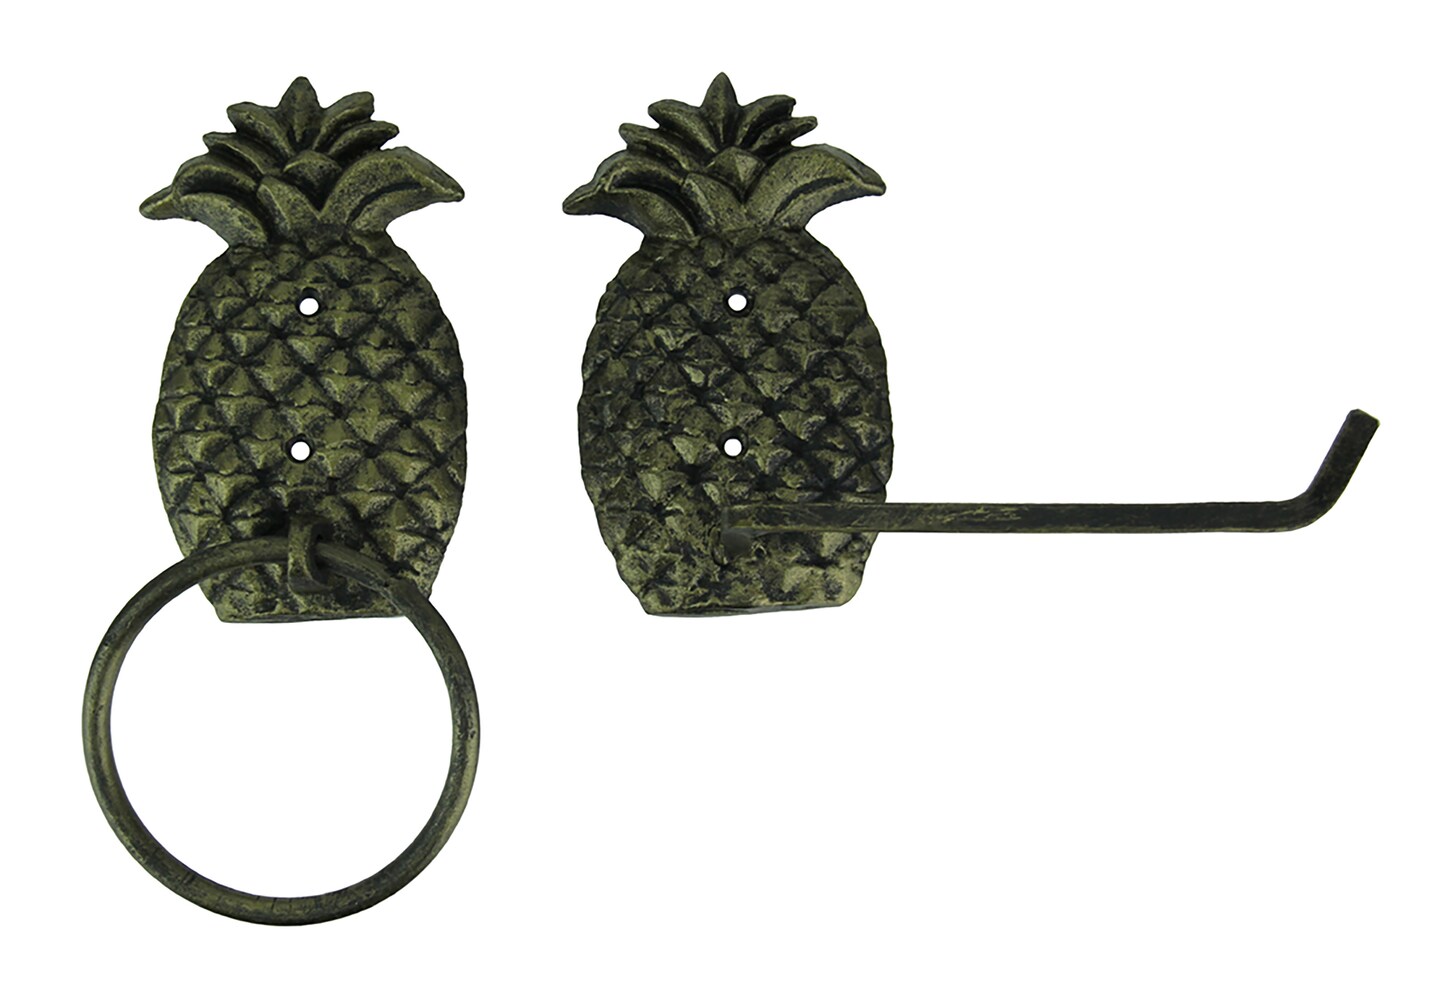 Antique Brass Finish Cast Iron Pineapple Towel and Tissue Holder Wall Decor Set